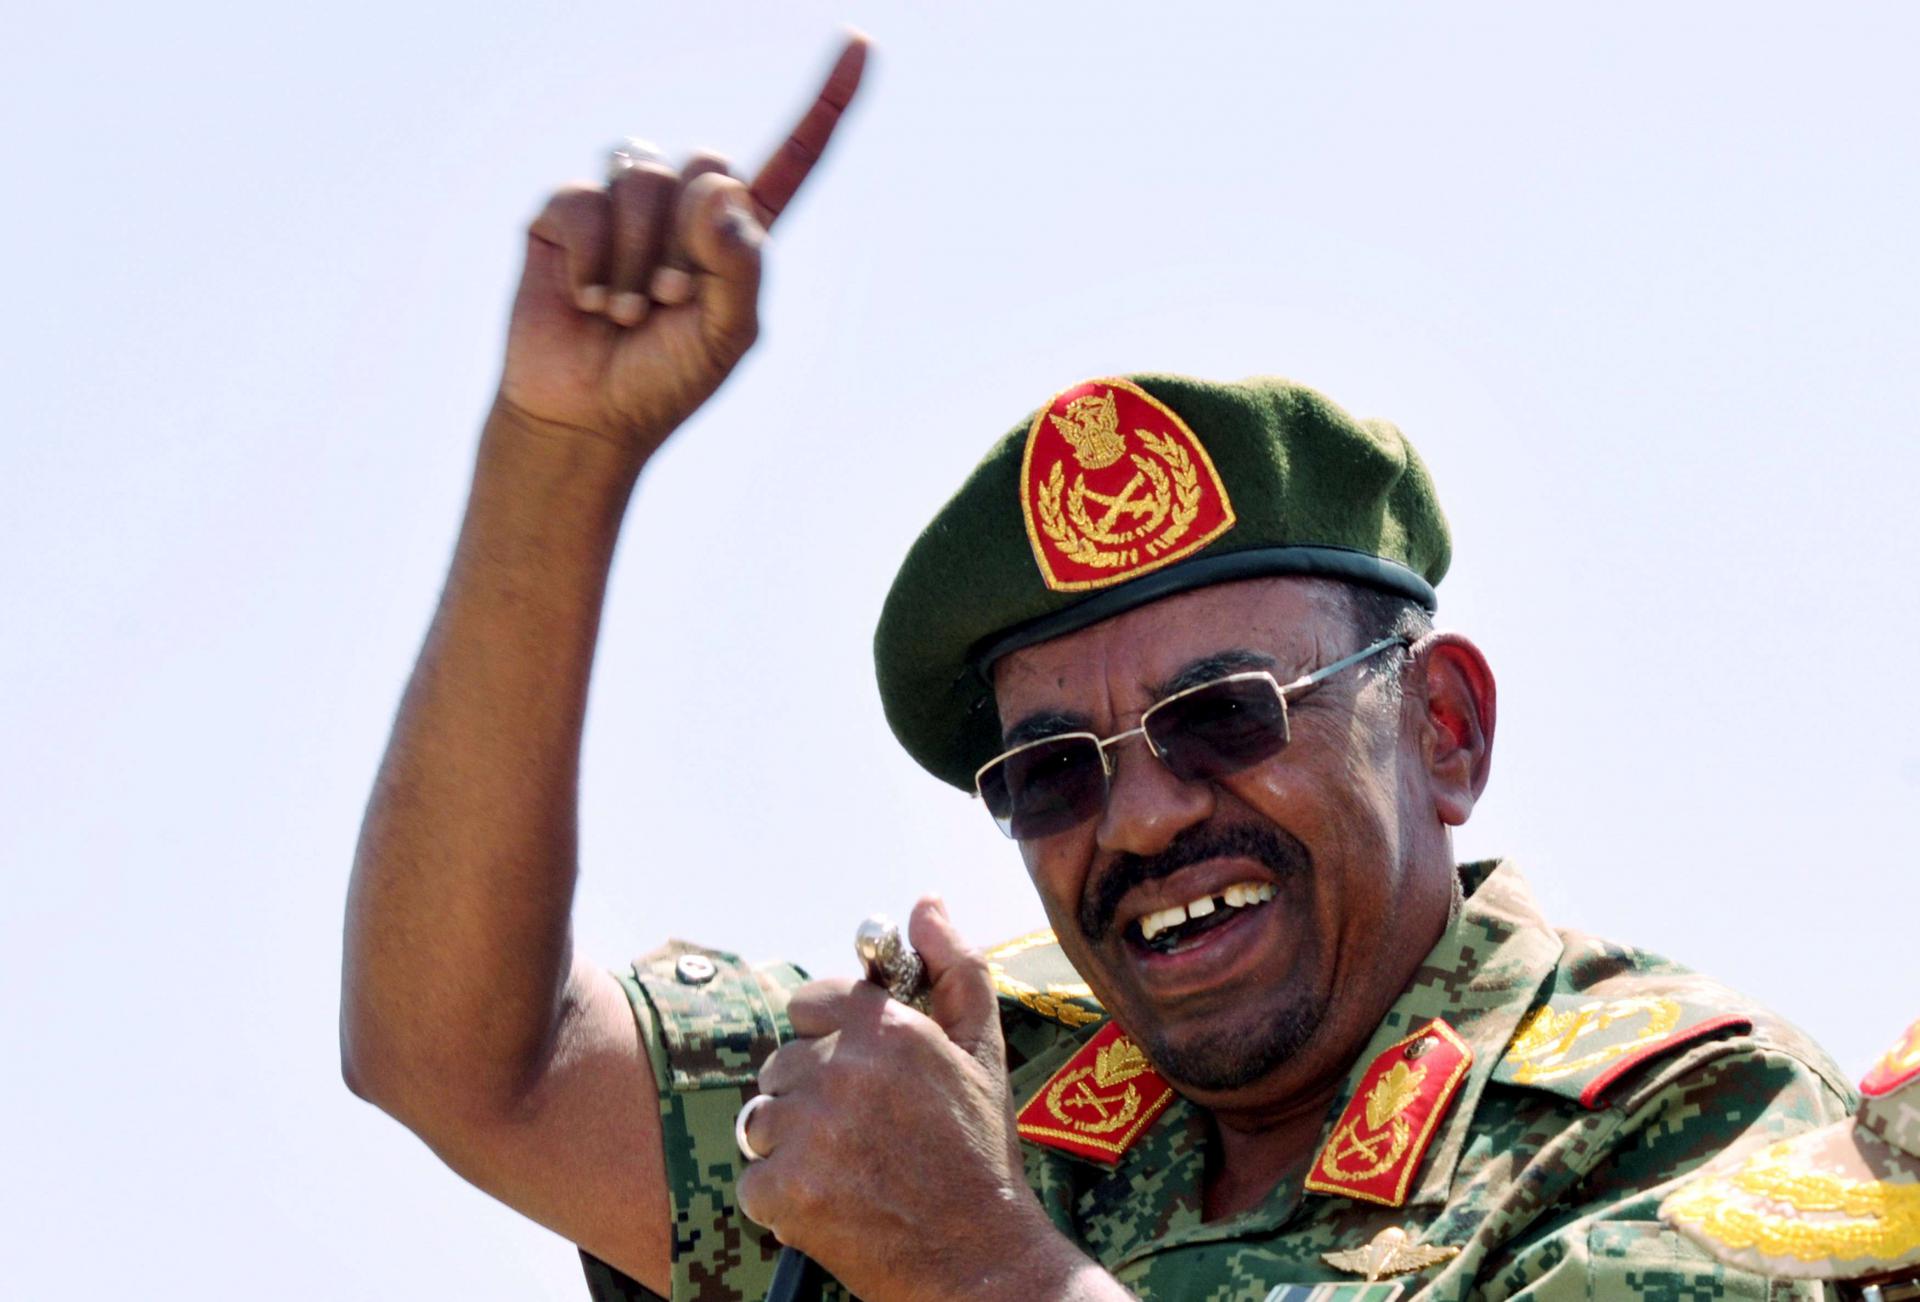 The most serious accusations include war crimes, crimes against humanity and genocide for his role in the war in Darfur